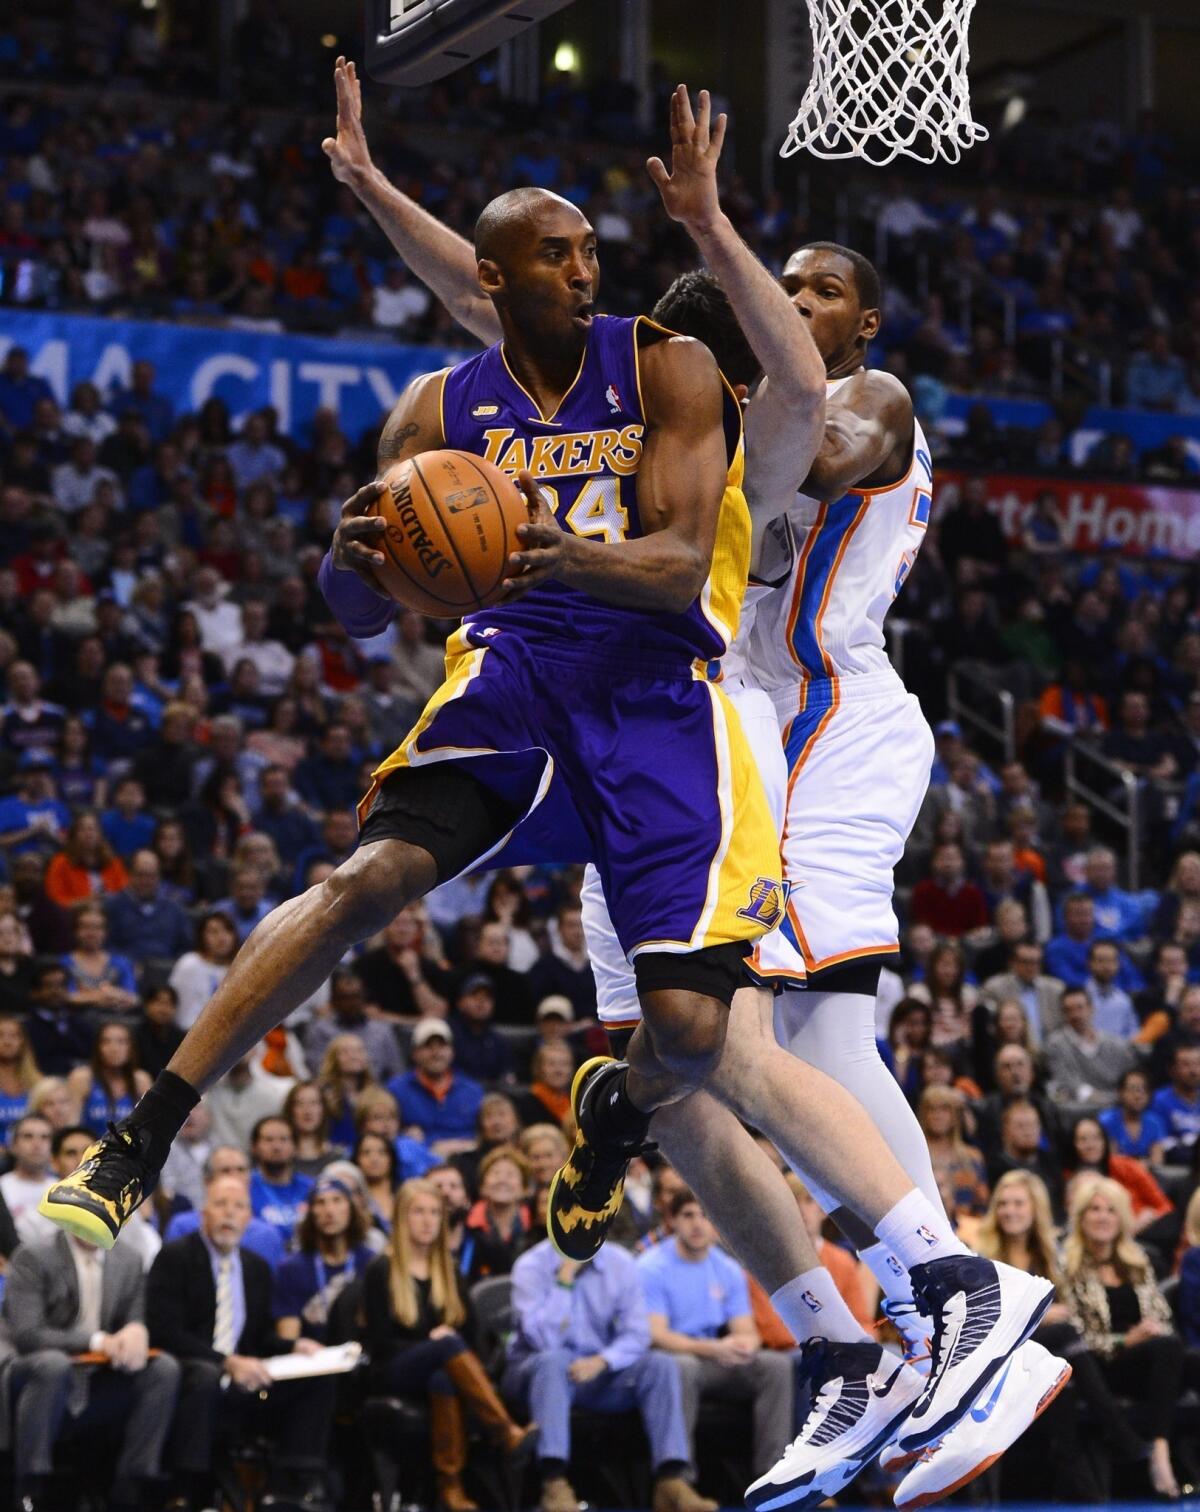 Lakers guard Kobe Bryant drives to the basket against the Oklahoma City Thunder.